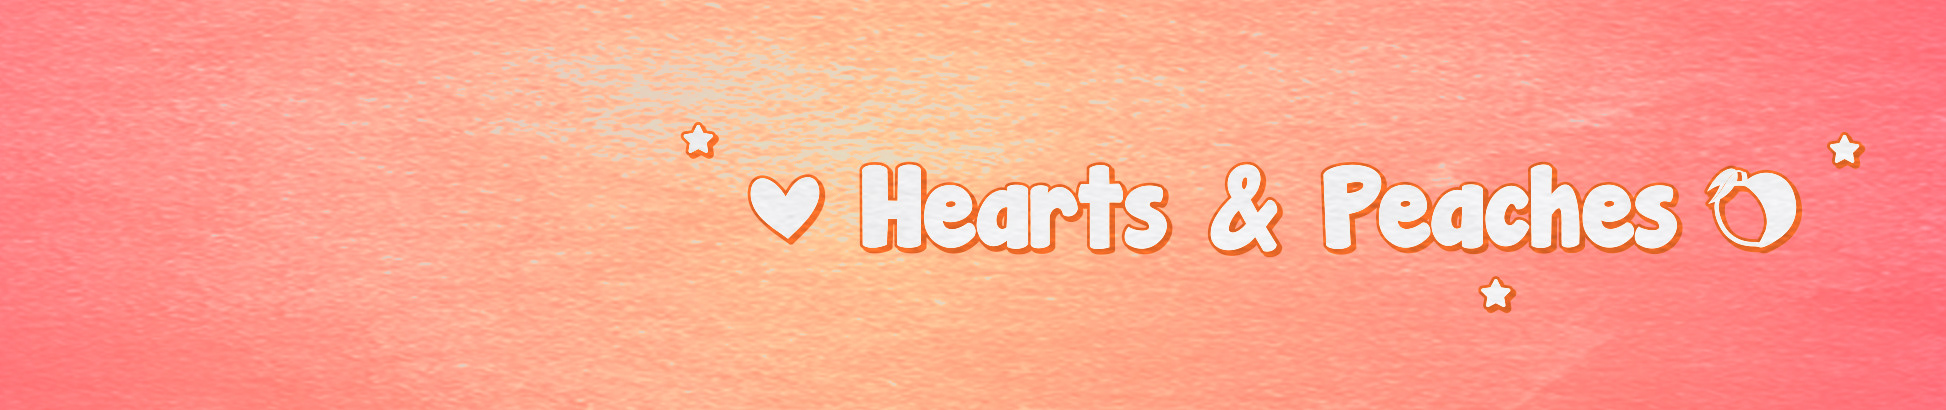 Hearts and Peachess profilbanner